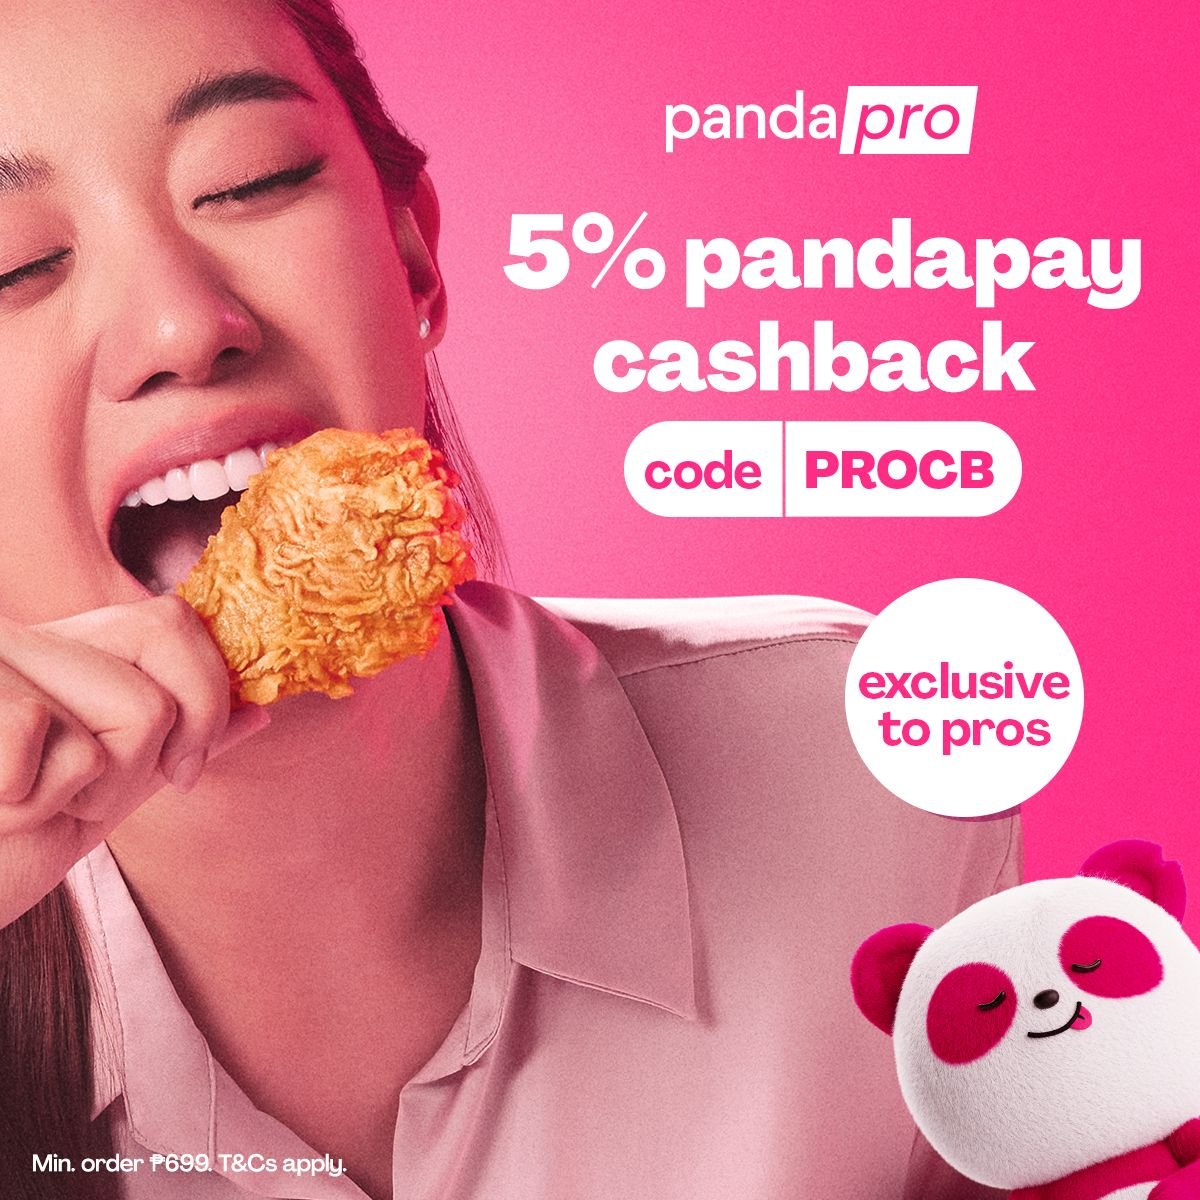 PANDAPRO VOUCHERS FOR TODAY 🩷

Order using this link ➡️ invl.io/clkw7fk

PROCB —5% cashback on all orders (min. ₱699)
PROFRIDAY — ₱500 off (varying minimum orders)
PROEATS — ₱100 off (min. ₱499) (Popeyes, Papa John's Pizza, Hatid Pinoy, Bo's Coffee, etc.)